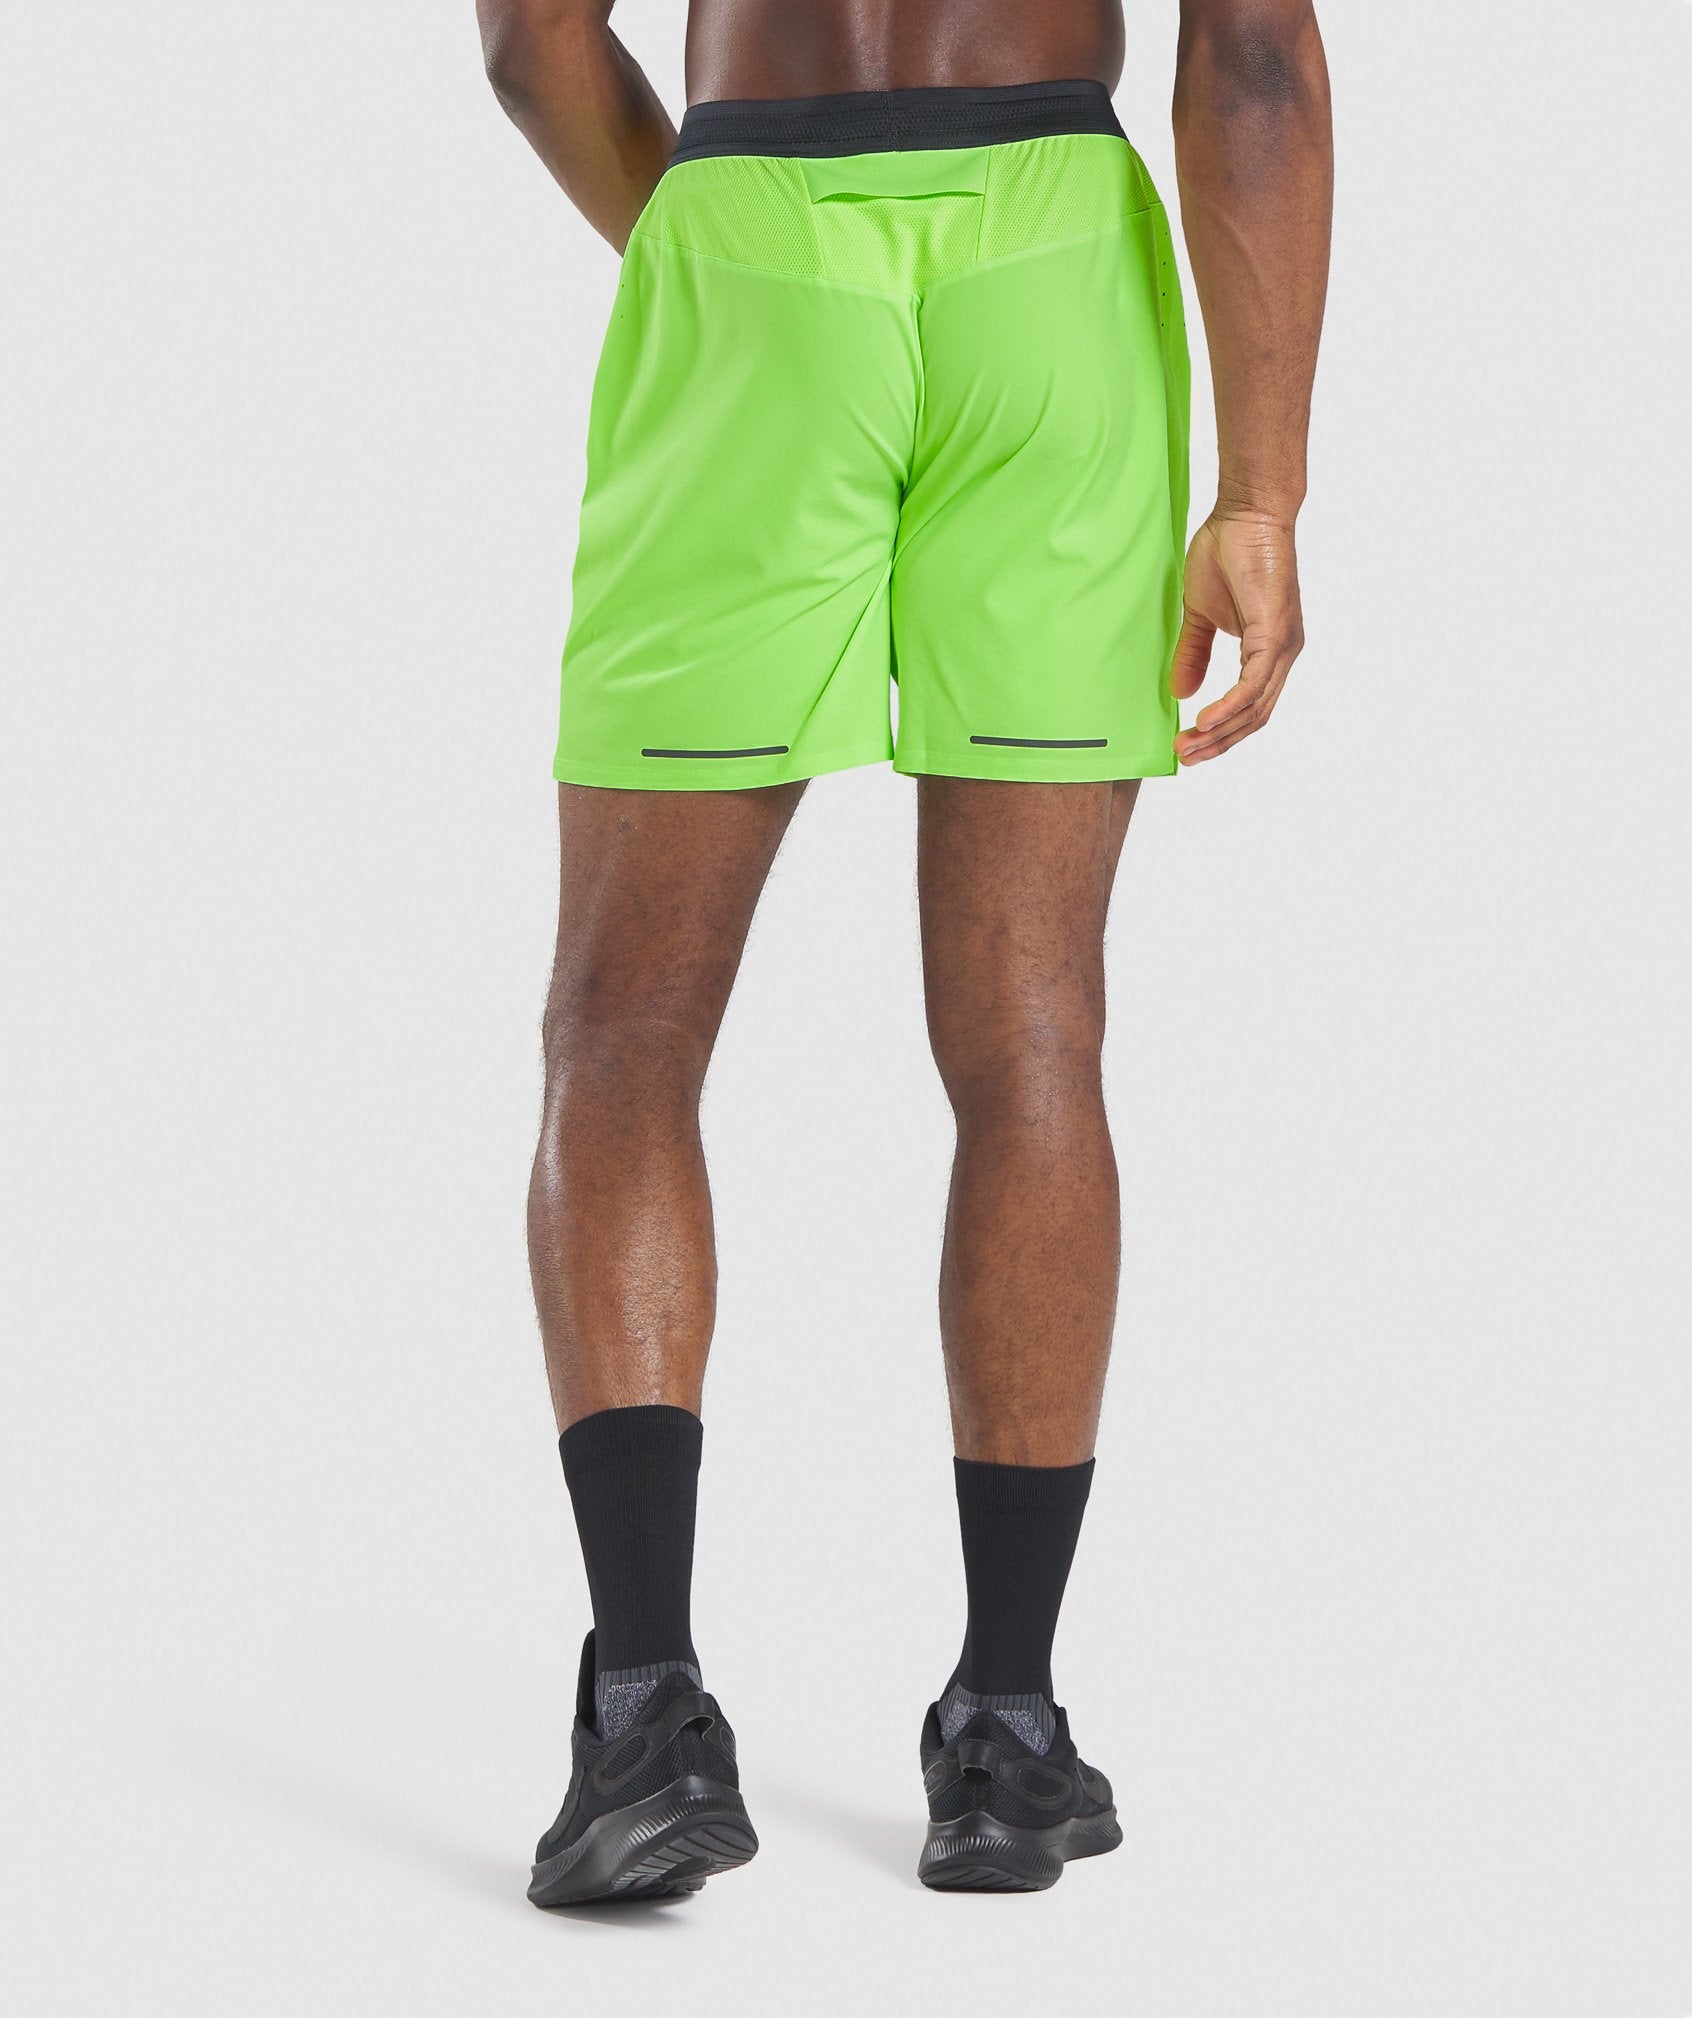 Speed 7" Shorts in Lime - view 3